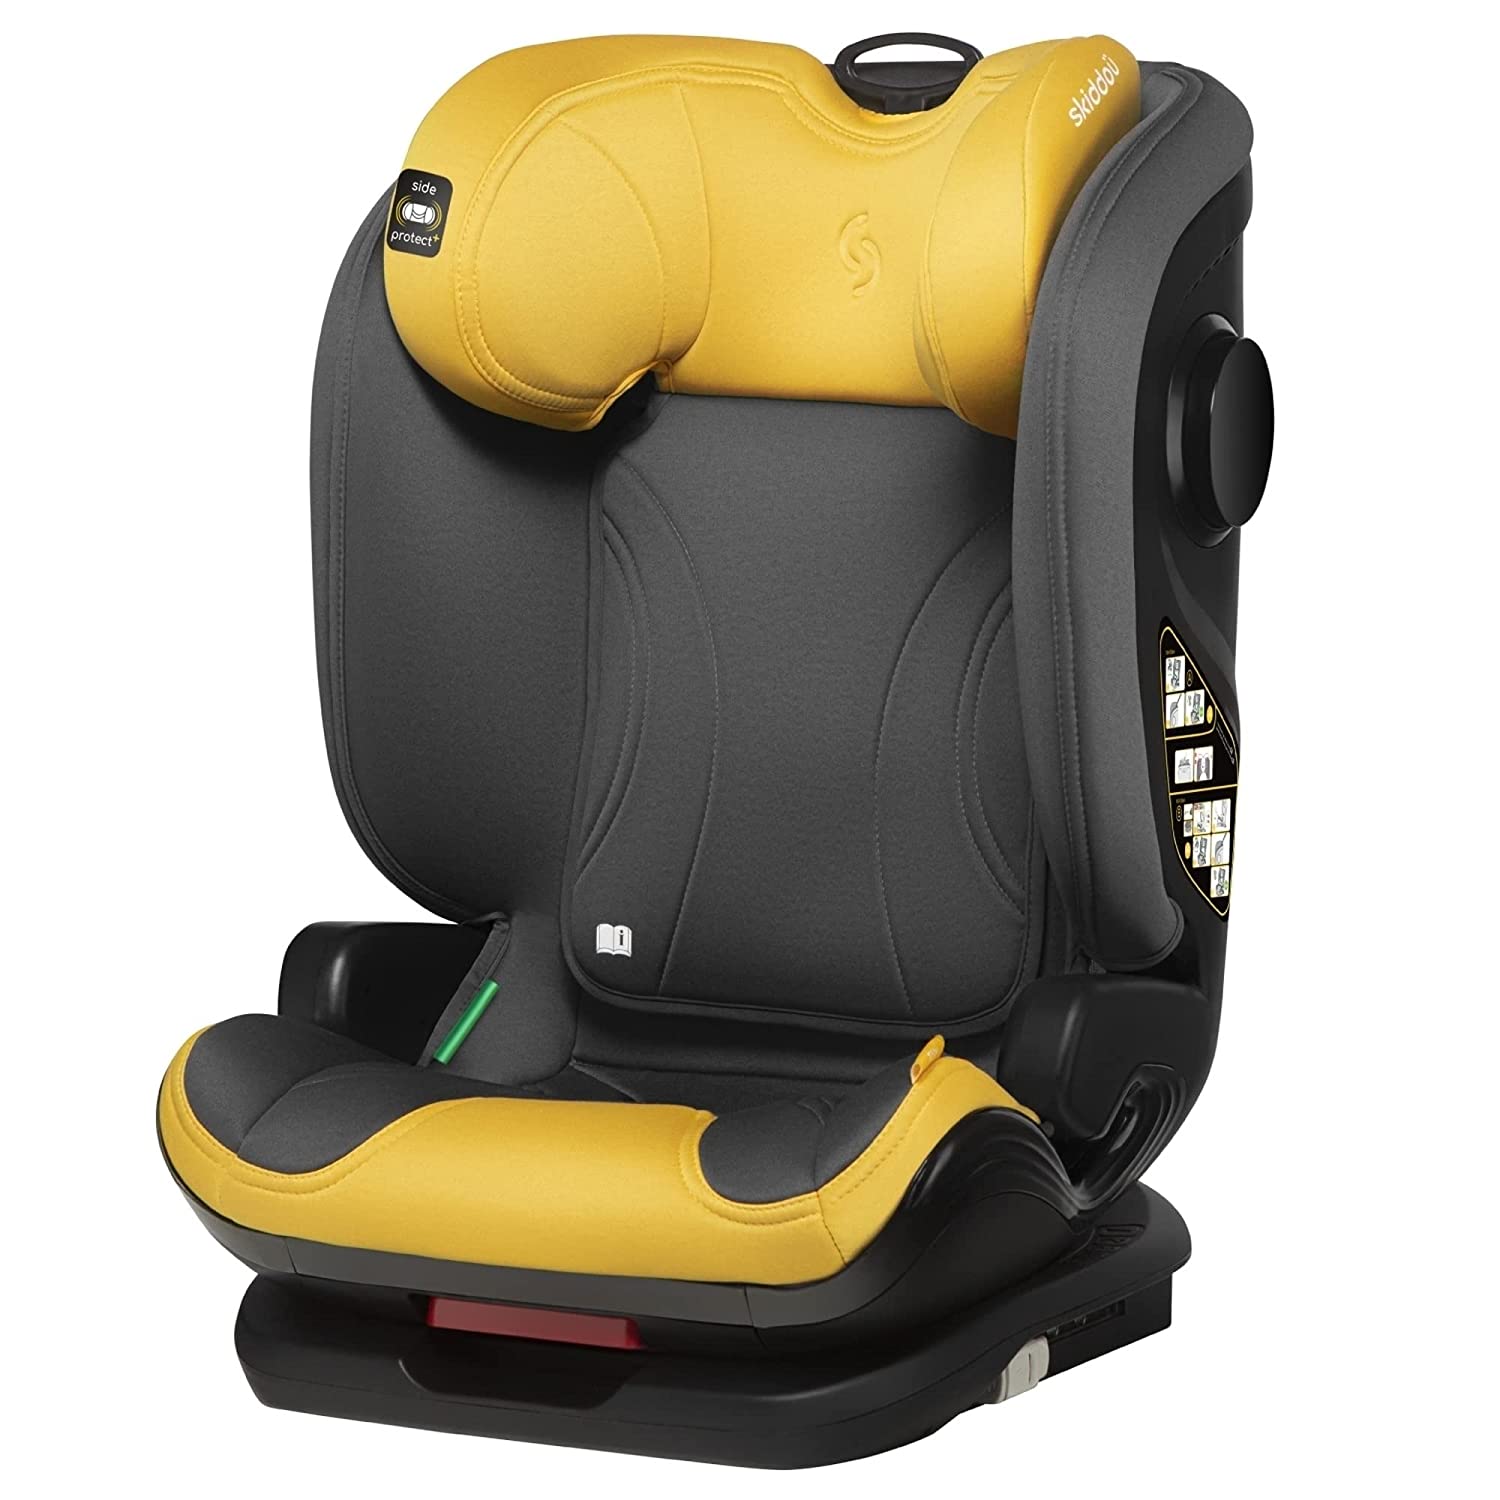 skiddoü Taby 2010014 Child Seat Group 2-3, Child Seat 15-36 kg with Isofix, Child Seat from 2 Years, Children\'s Car Seat 100-150 cm, 7-Way Height Adjustable, Backrest Adjustable to 4 Positions, Yellow